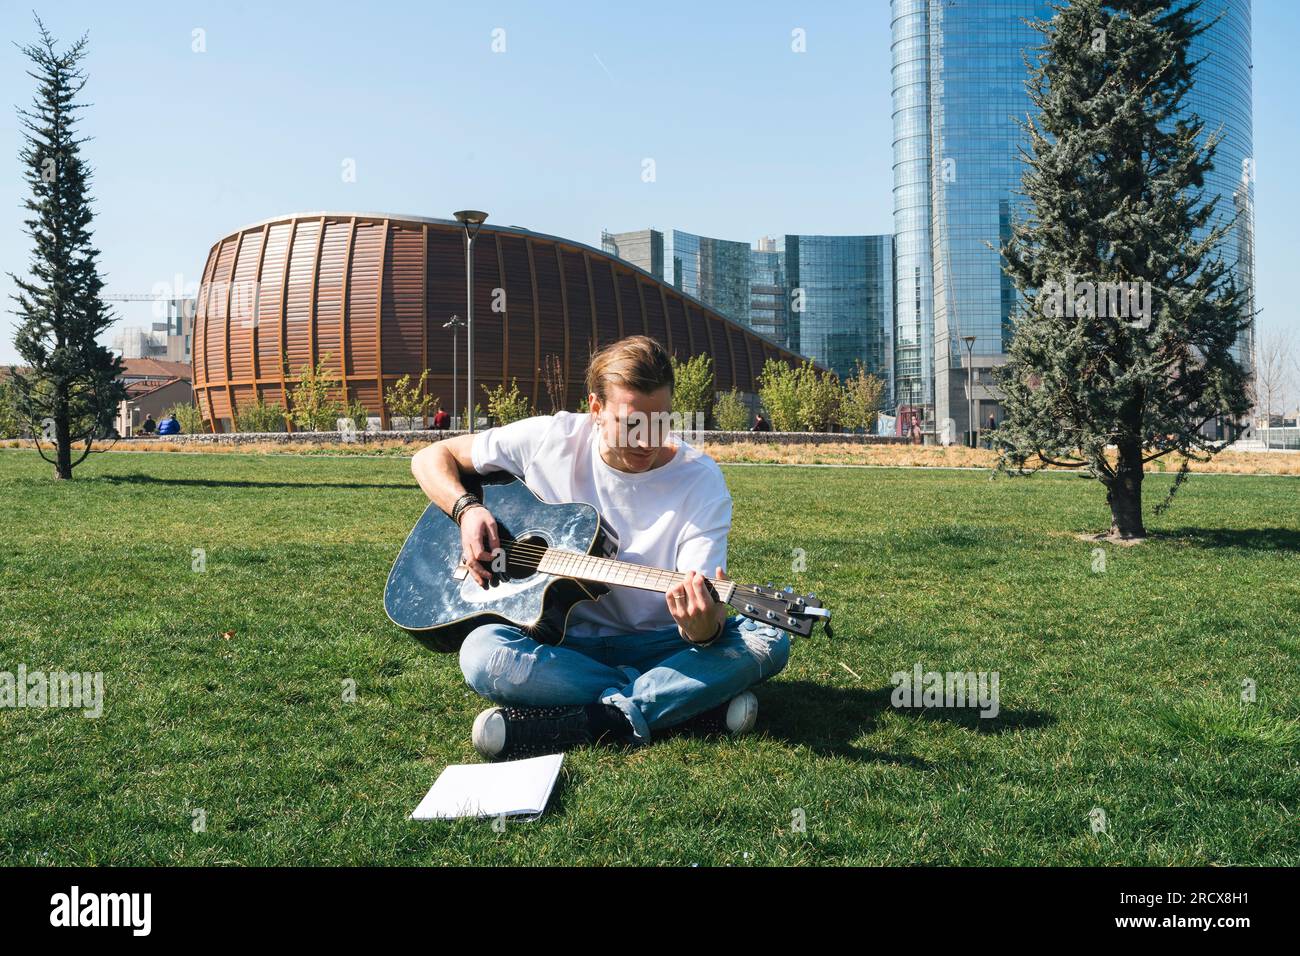 man studying music in urban garden playing guitar and reading script Stock Photo